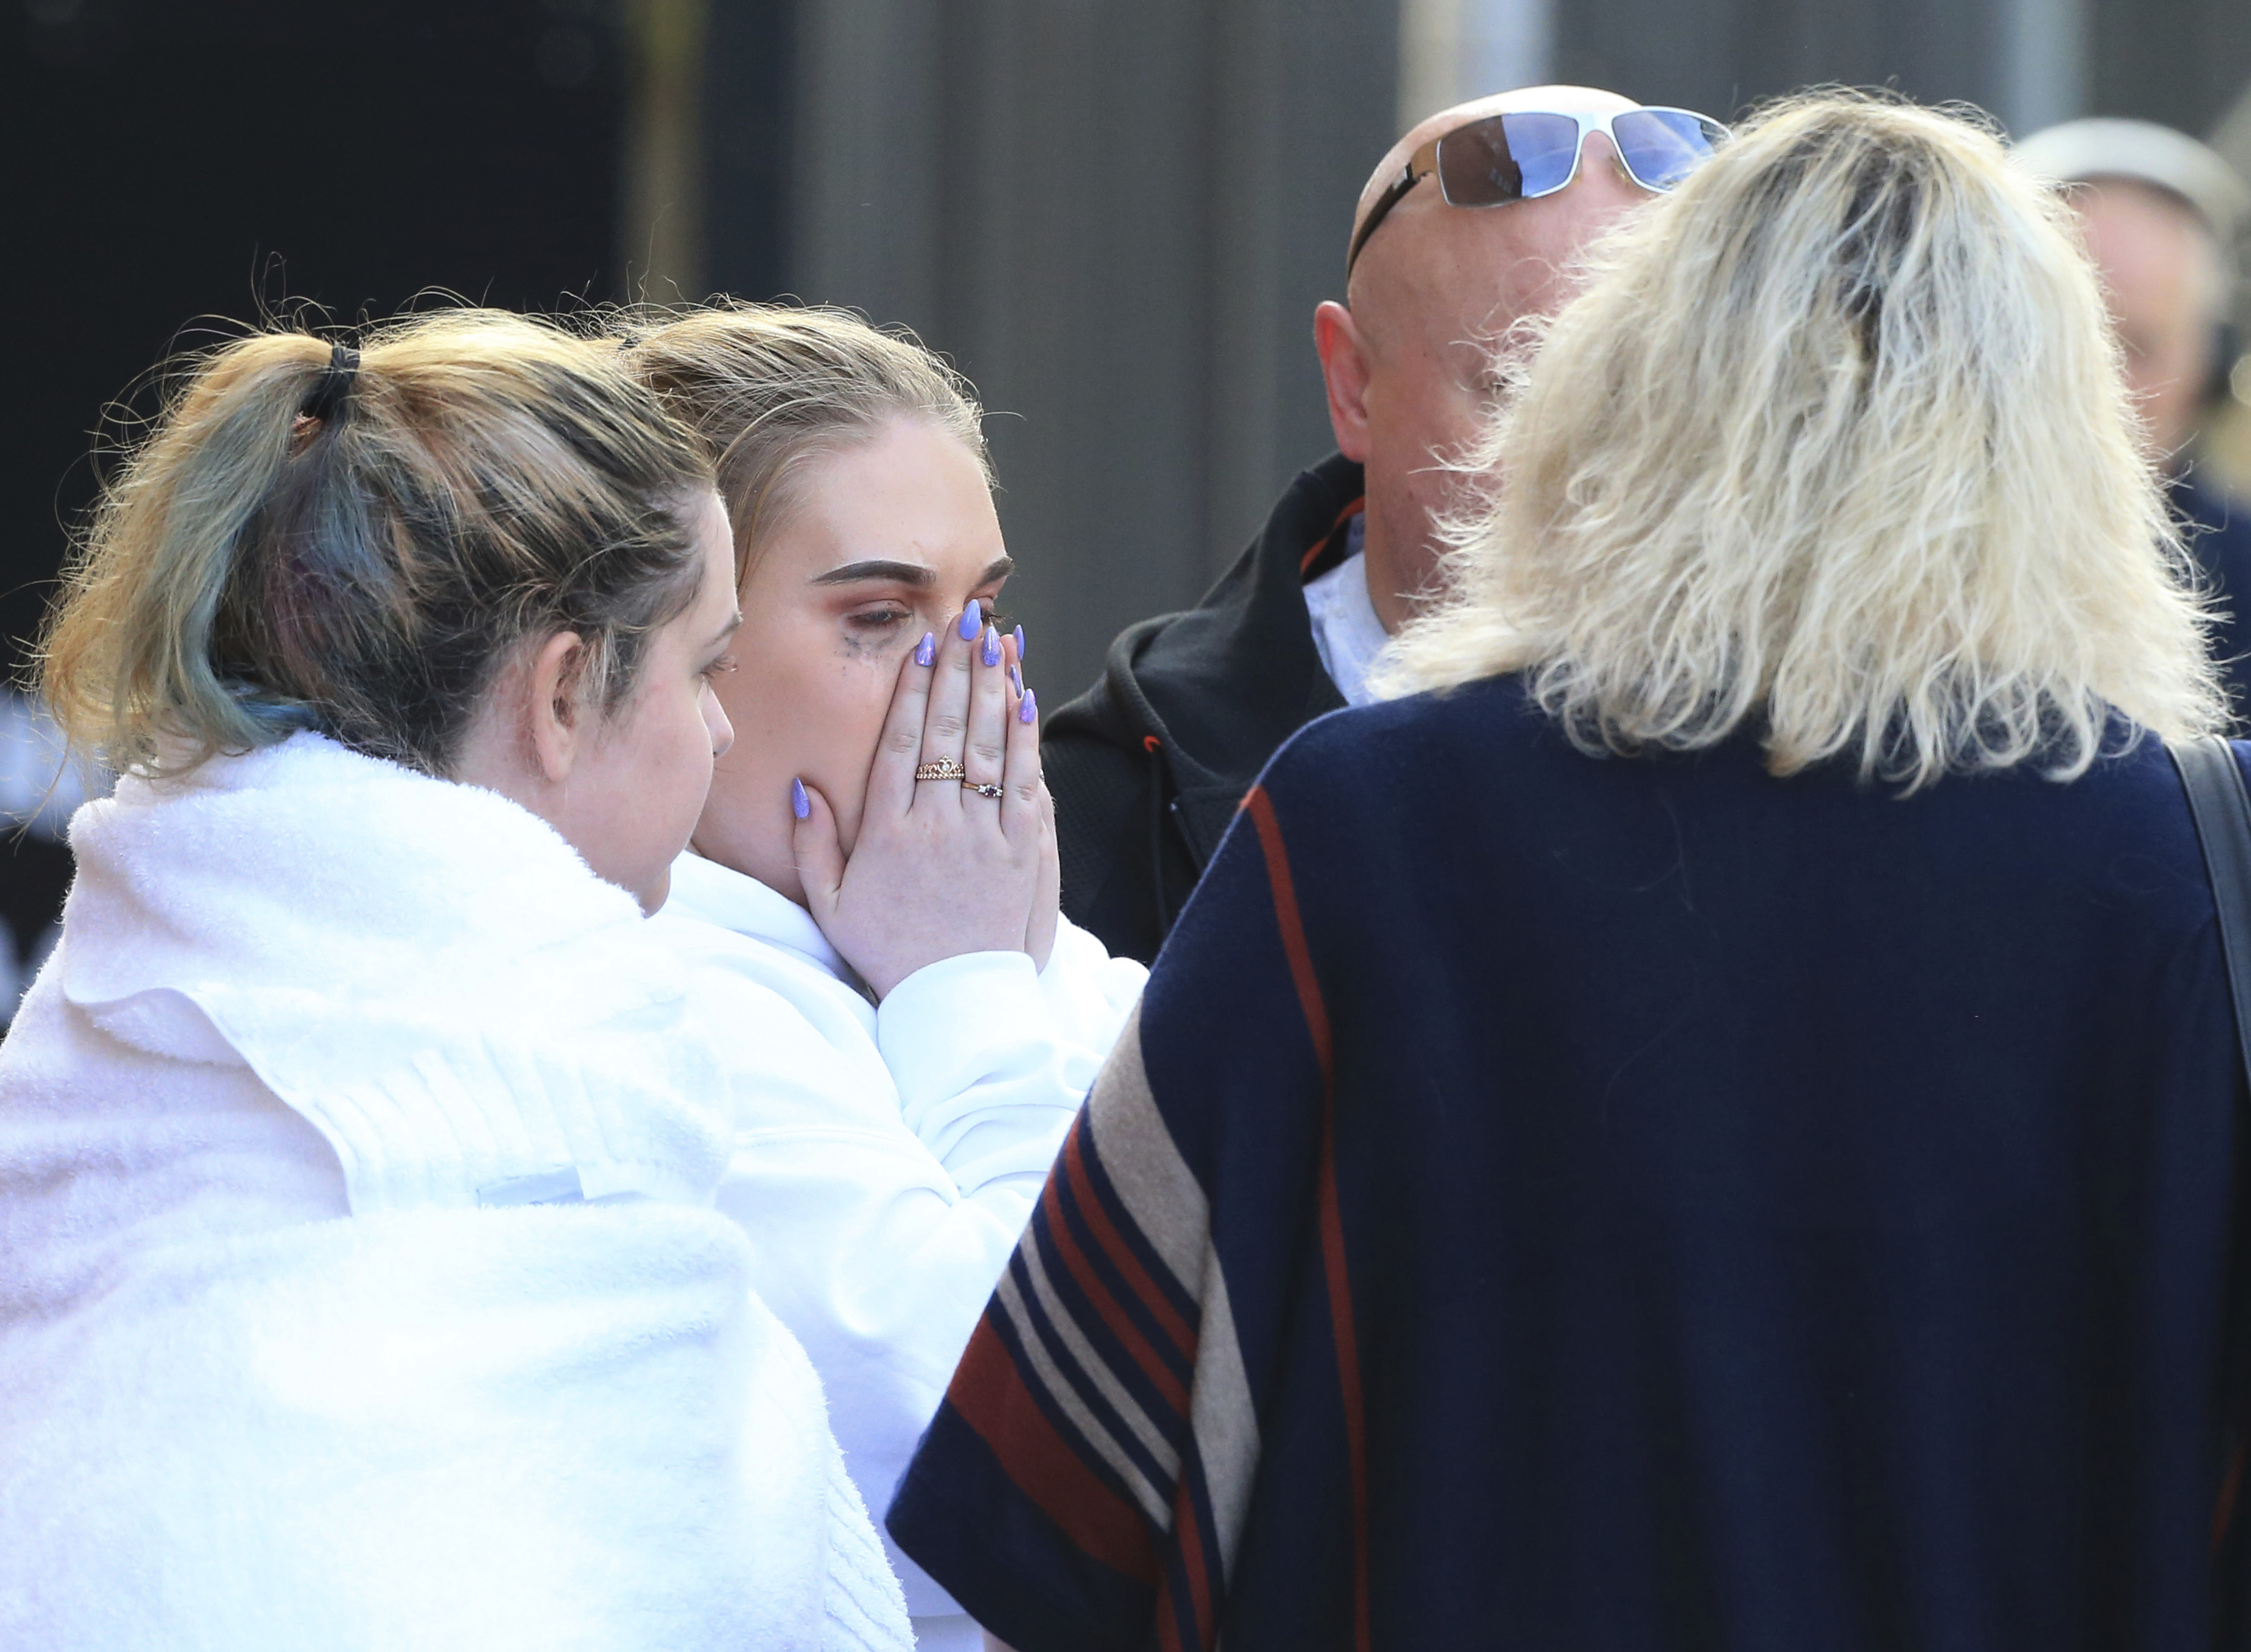 Fan leaves the Park Inn hotel in central Manchester, England, Tuesday, May 23, 2017. Over a dozen people were killed in an explosion following a Ariana Grande concert at the Manchester Arena late Monday evening. (AP Photo/Rui Vieira)